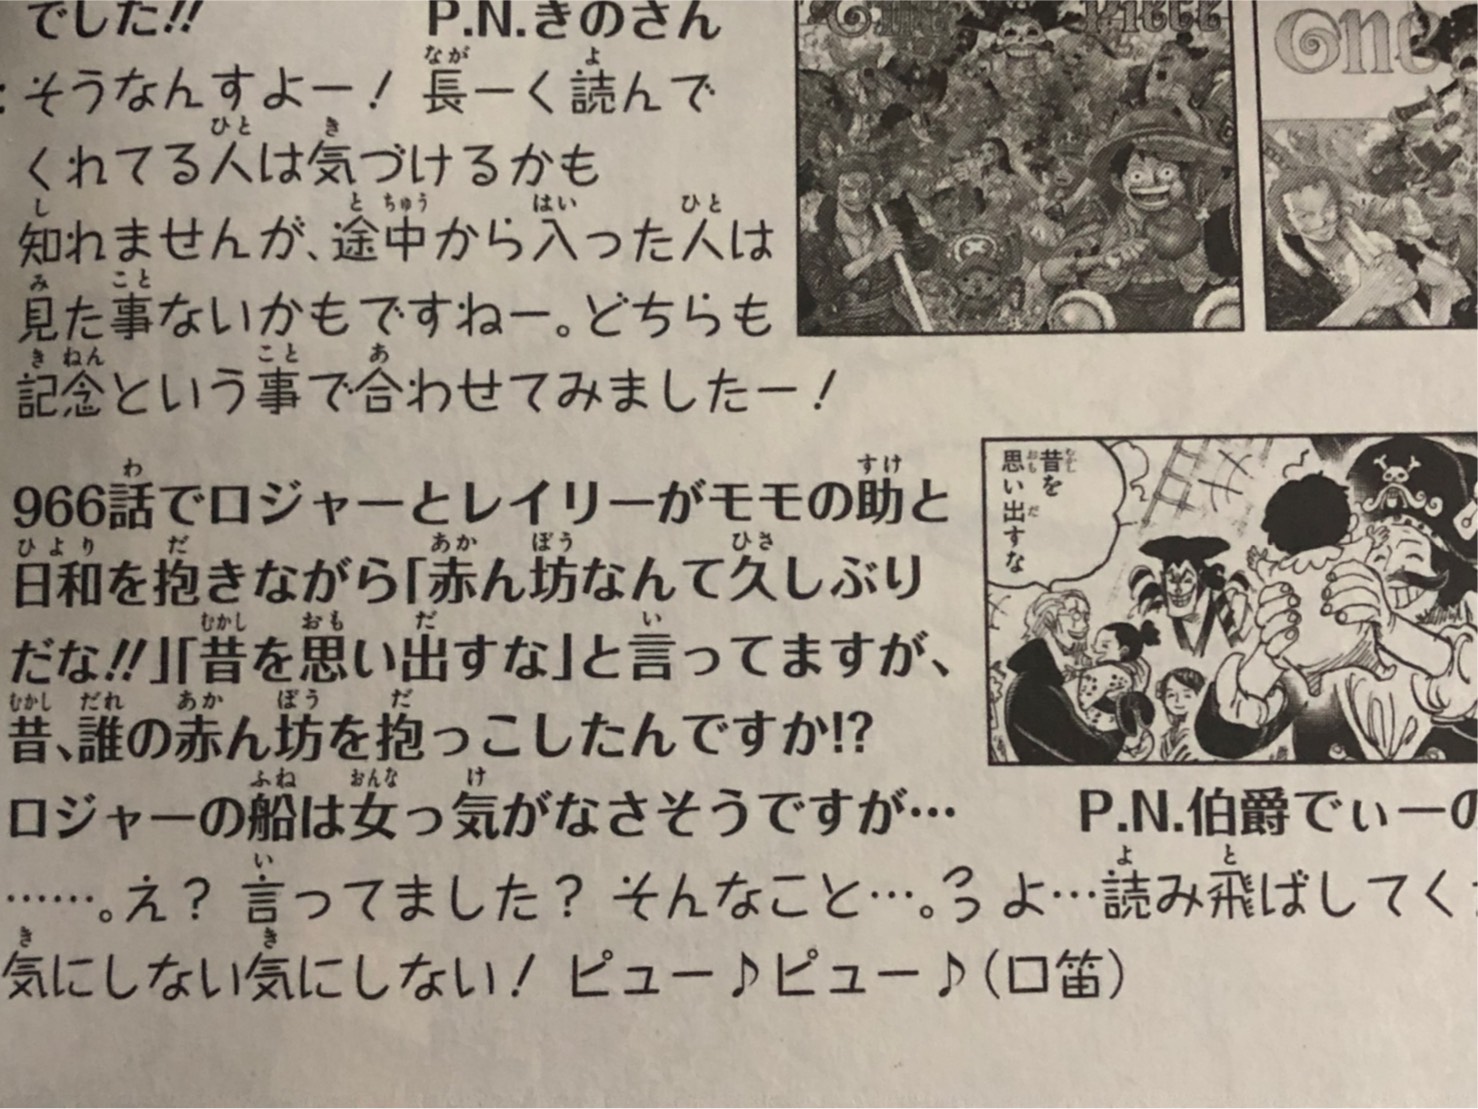 Onepiece第99巻sbs考察 ロジャーとレイリーの赤ん坊発言 赤太郎とバギ次郎確定 ワンピース考察 甲塚誓ノ介のいい芝居してますね Part 3